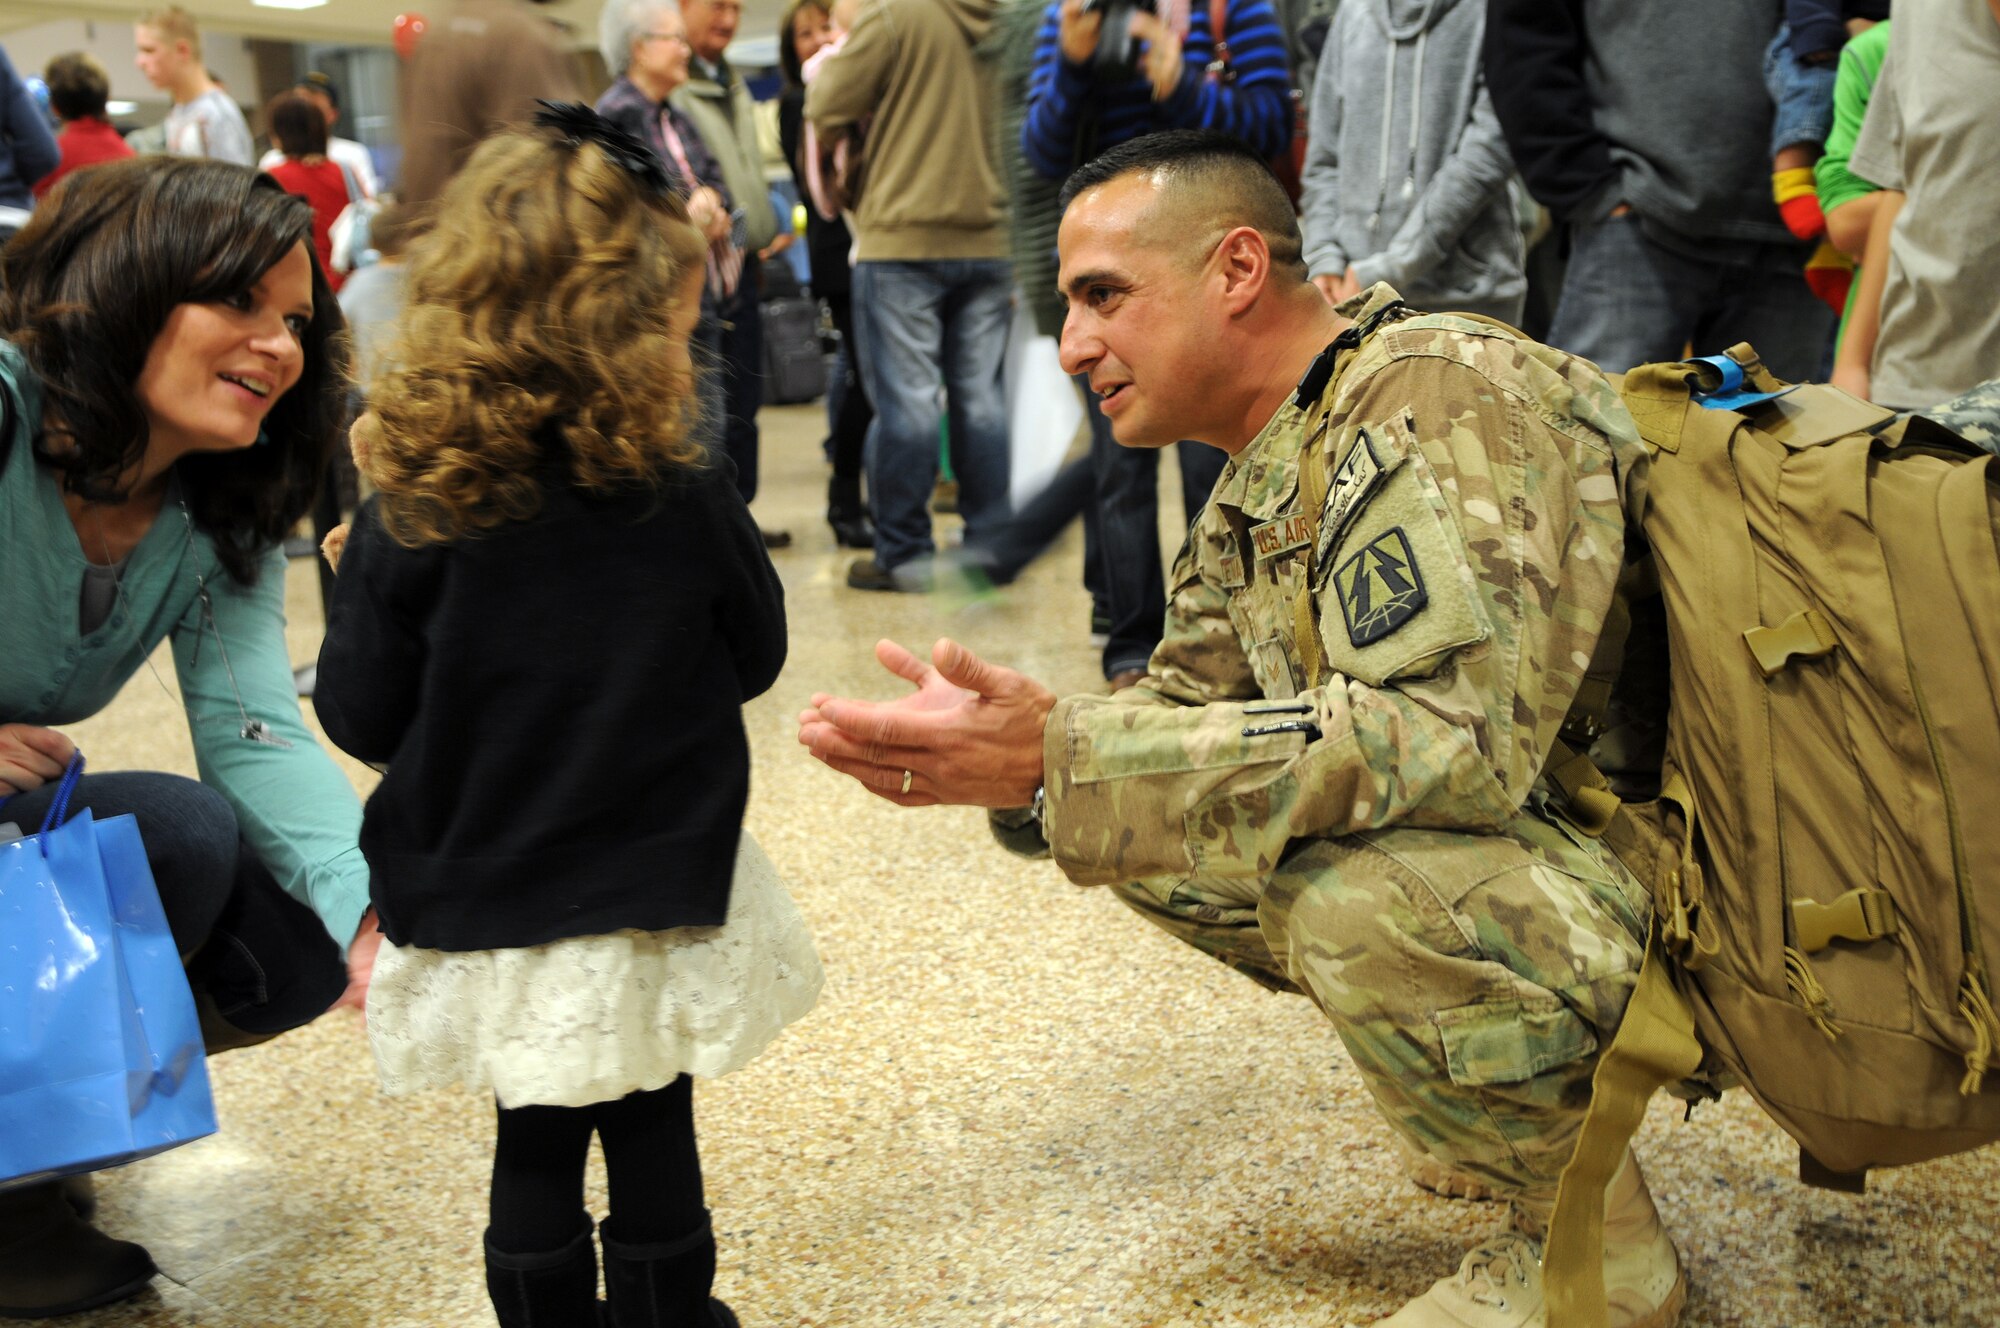 Senior Airman Dave Santistevan greeted his wife, Tiffany, and asked his young daughter for a hug after he returned from deployment at the Salt Lake City International Airport, Nov. 16. Santistevan and eleven other members of the 130th Engineering Installation Squadron served a six-month deployment in support of Operation Enduring Freedom throughout several forward operating bases in Afghanistan. (U.S. Air Force photo by Staff Sgt. Joe Davis)(RELEASED)